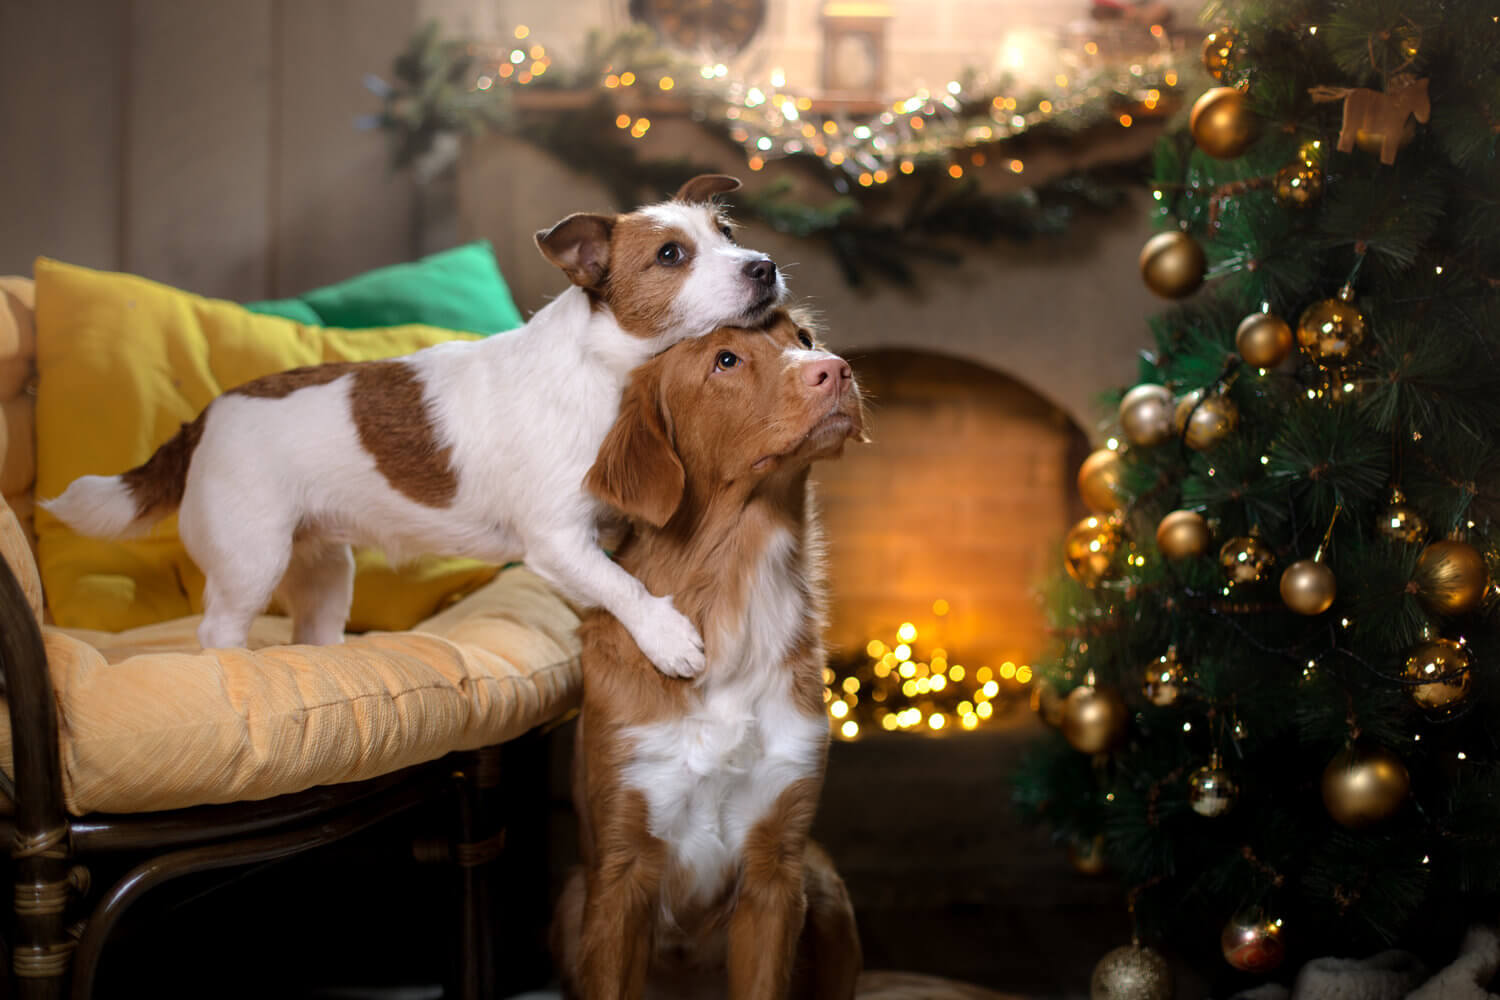 Dog Jack Russell Terrier and a Nova Scotia Duck Tolling Retriever by the fireplace with a Christmas tree